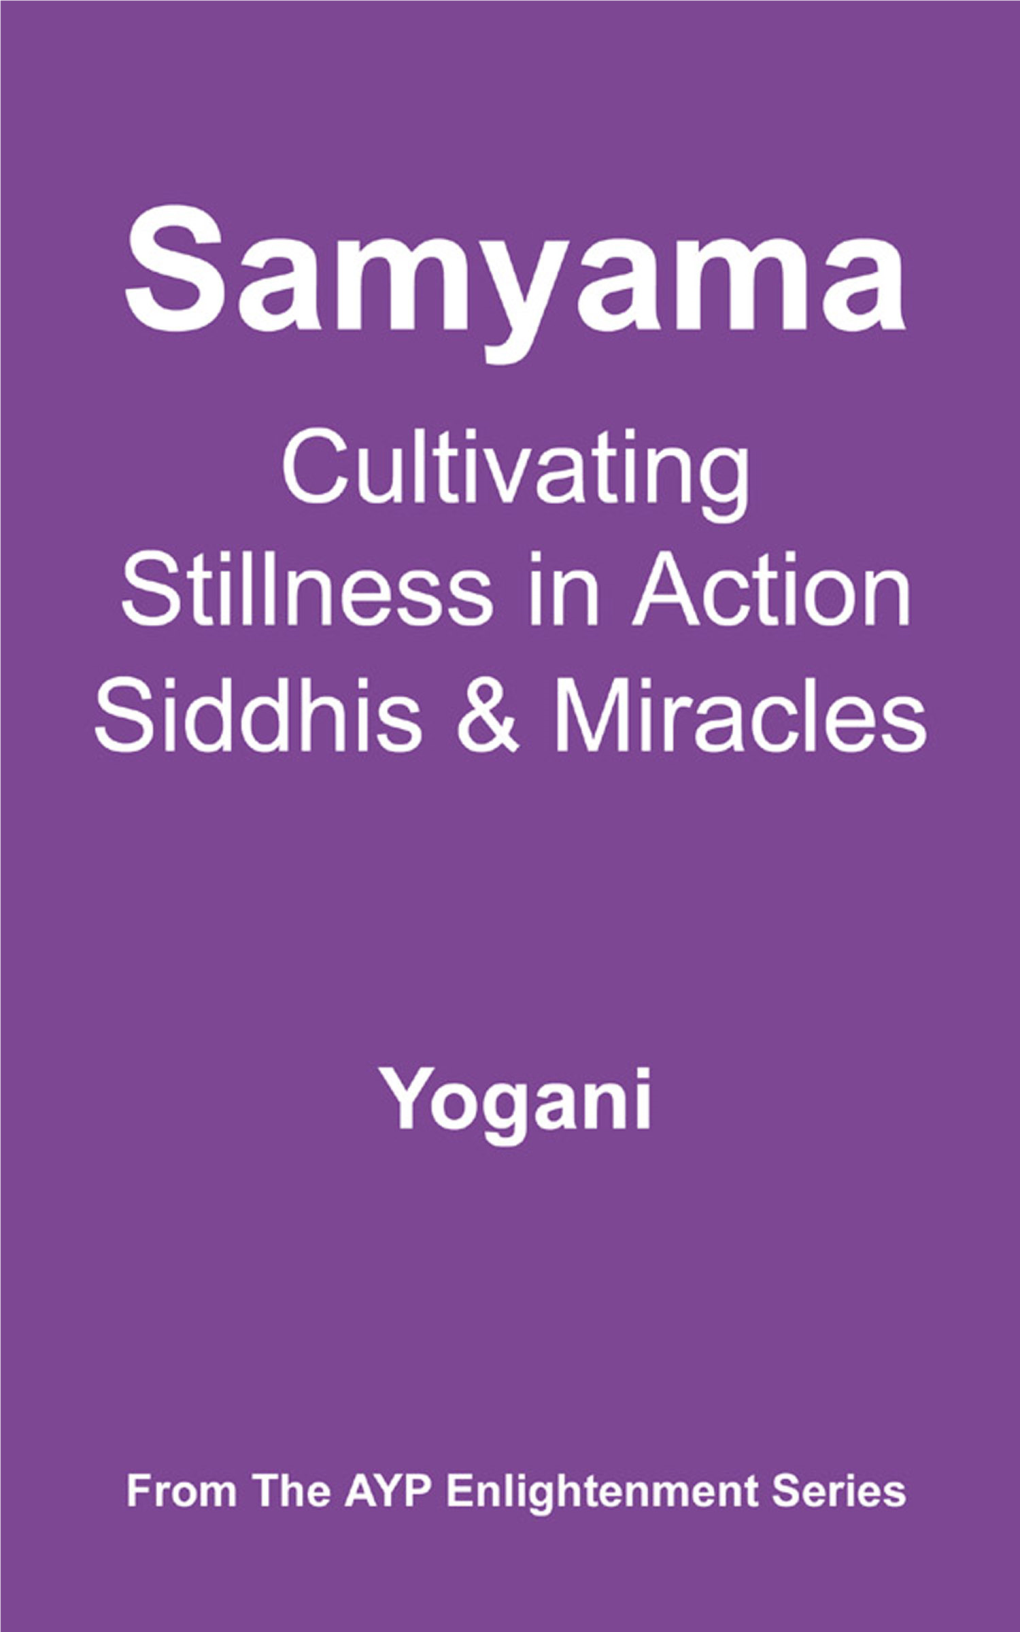 Samyama – Cultivating Stillness in Action, Siddhis and Miracles